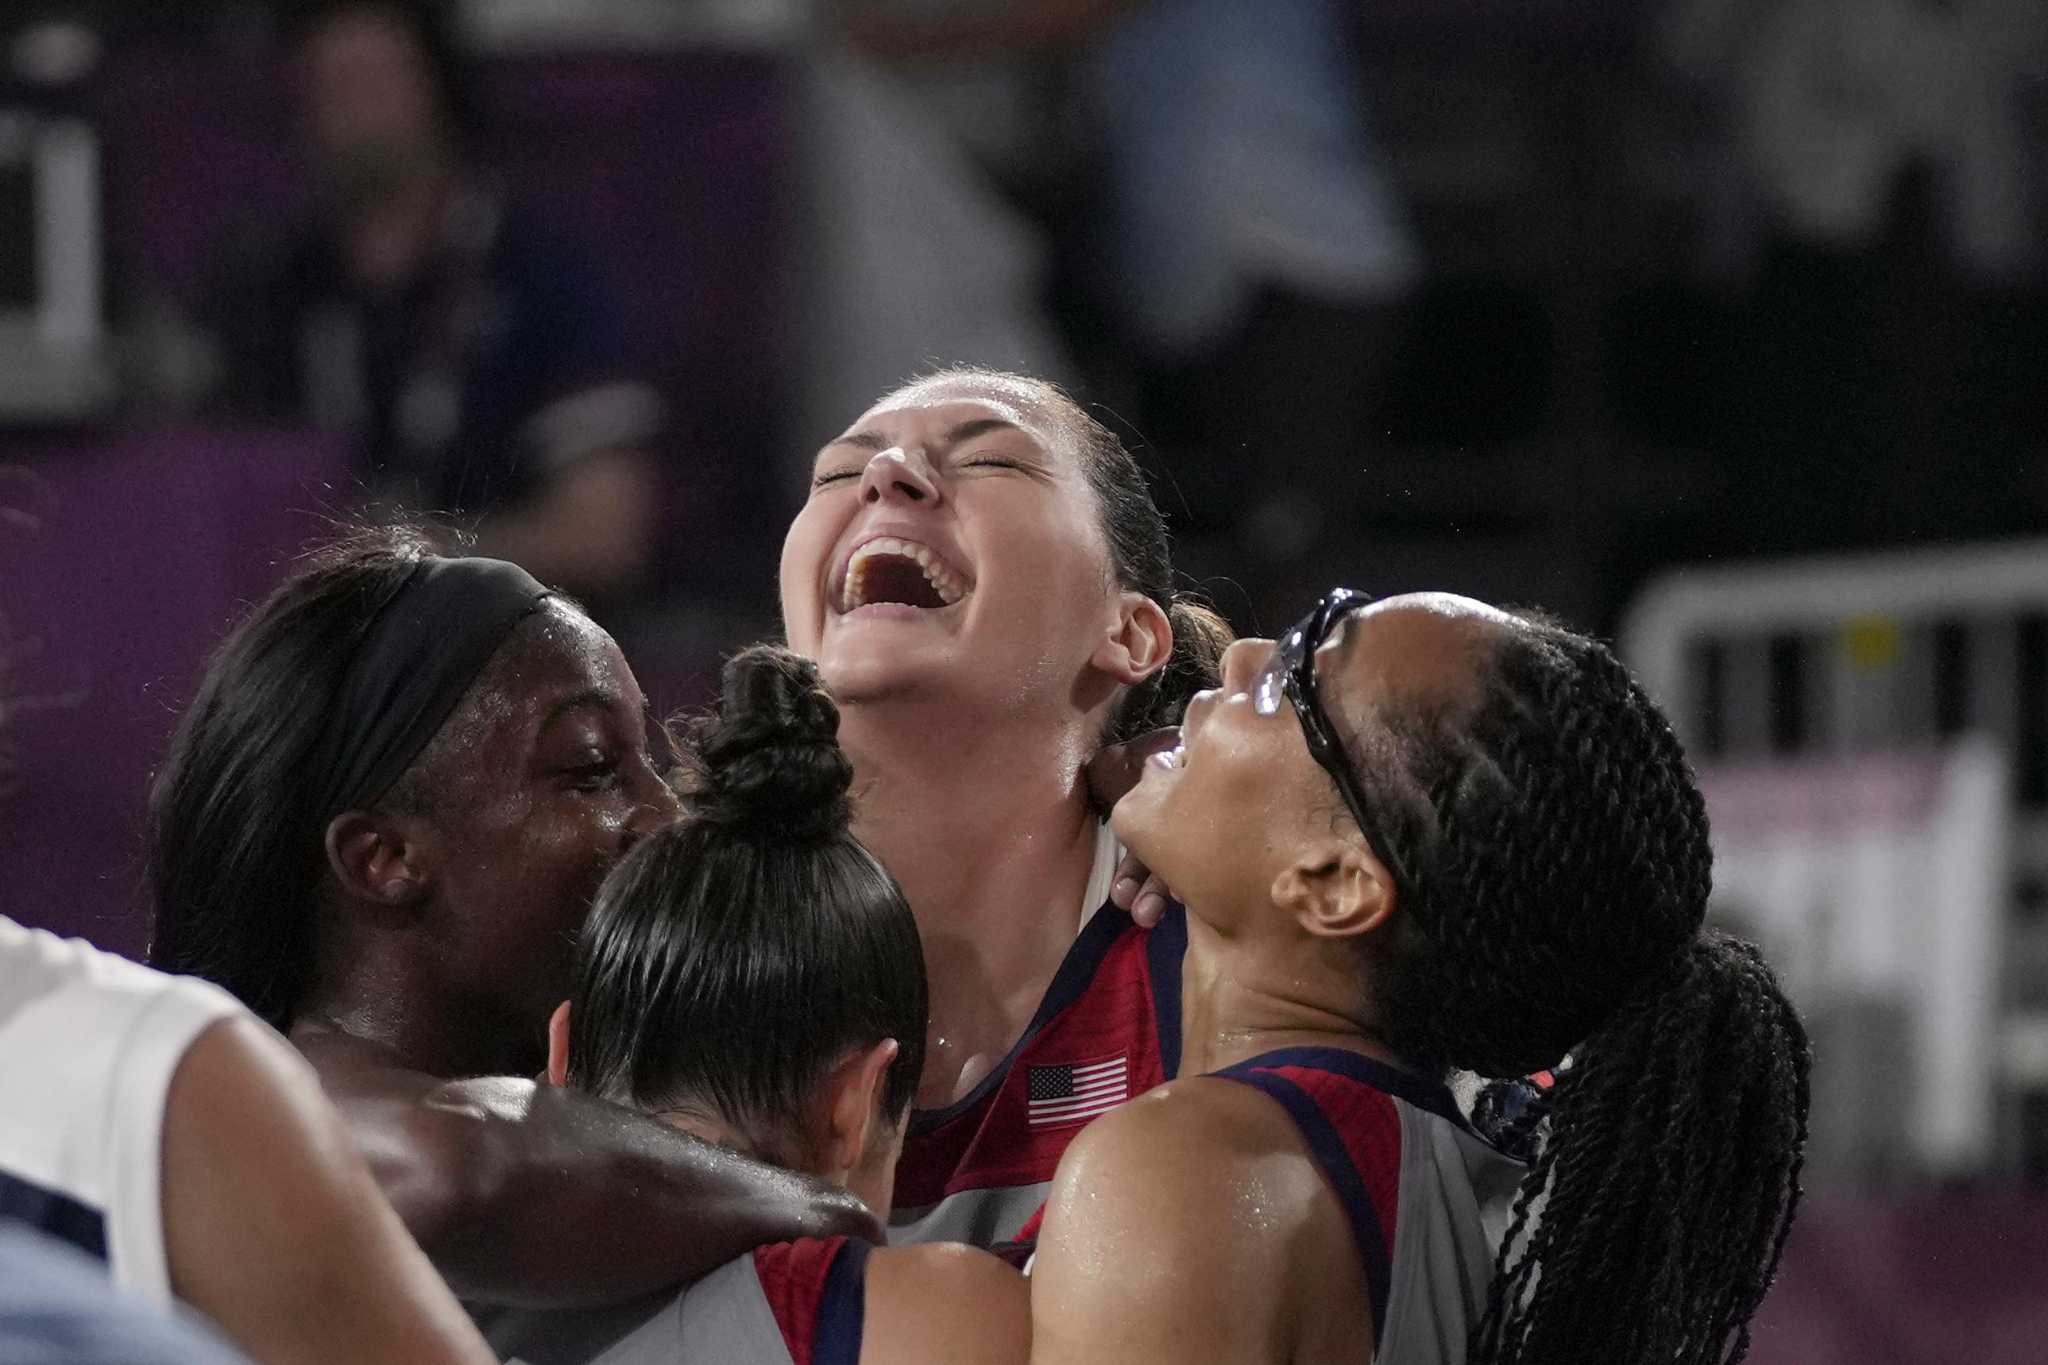 Behind Uconn’s Stefanie Dolson Team Usa Wins Gold Medal In 3x3 Basketball Olympic Debut